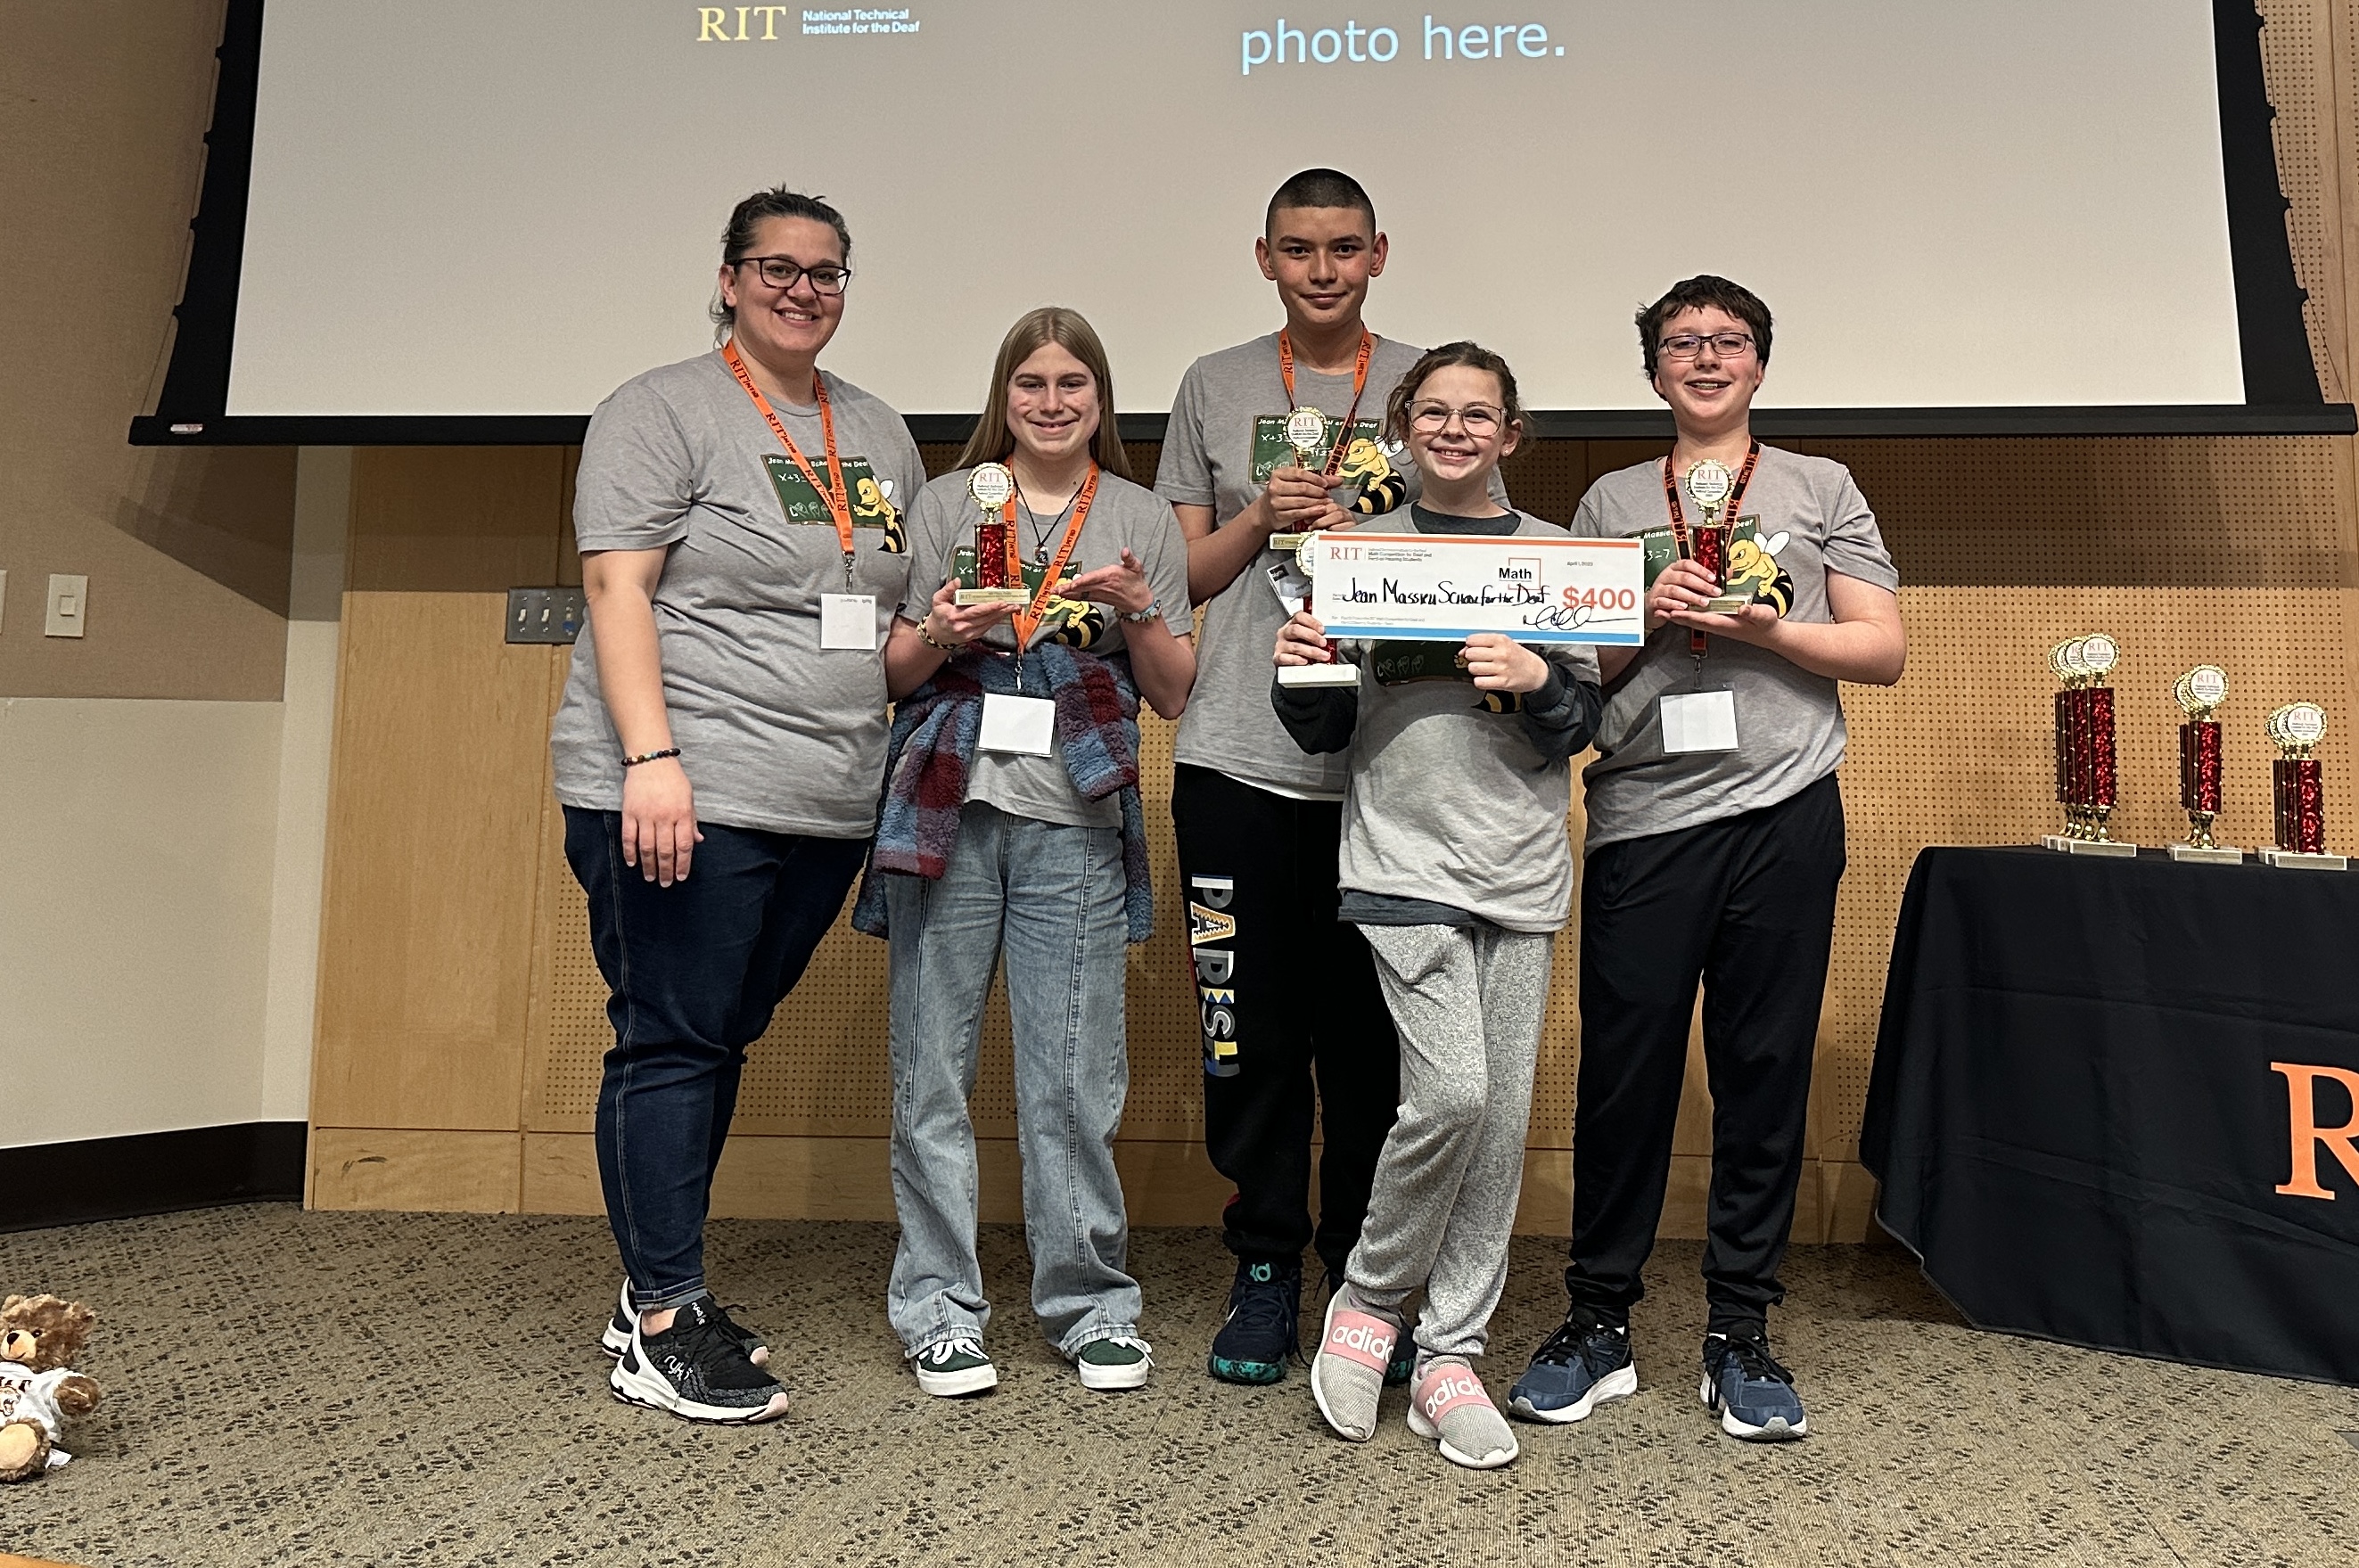 The image shows Jean Massieu School for the Deaf contestants and their coach in Grey t-shirts, standing in line, facing the camera and holding up trophies and a check for $400. Each person is wearing an orange name tag.